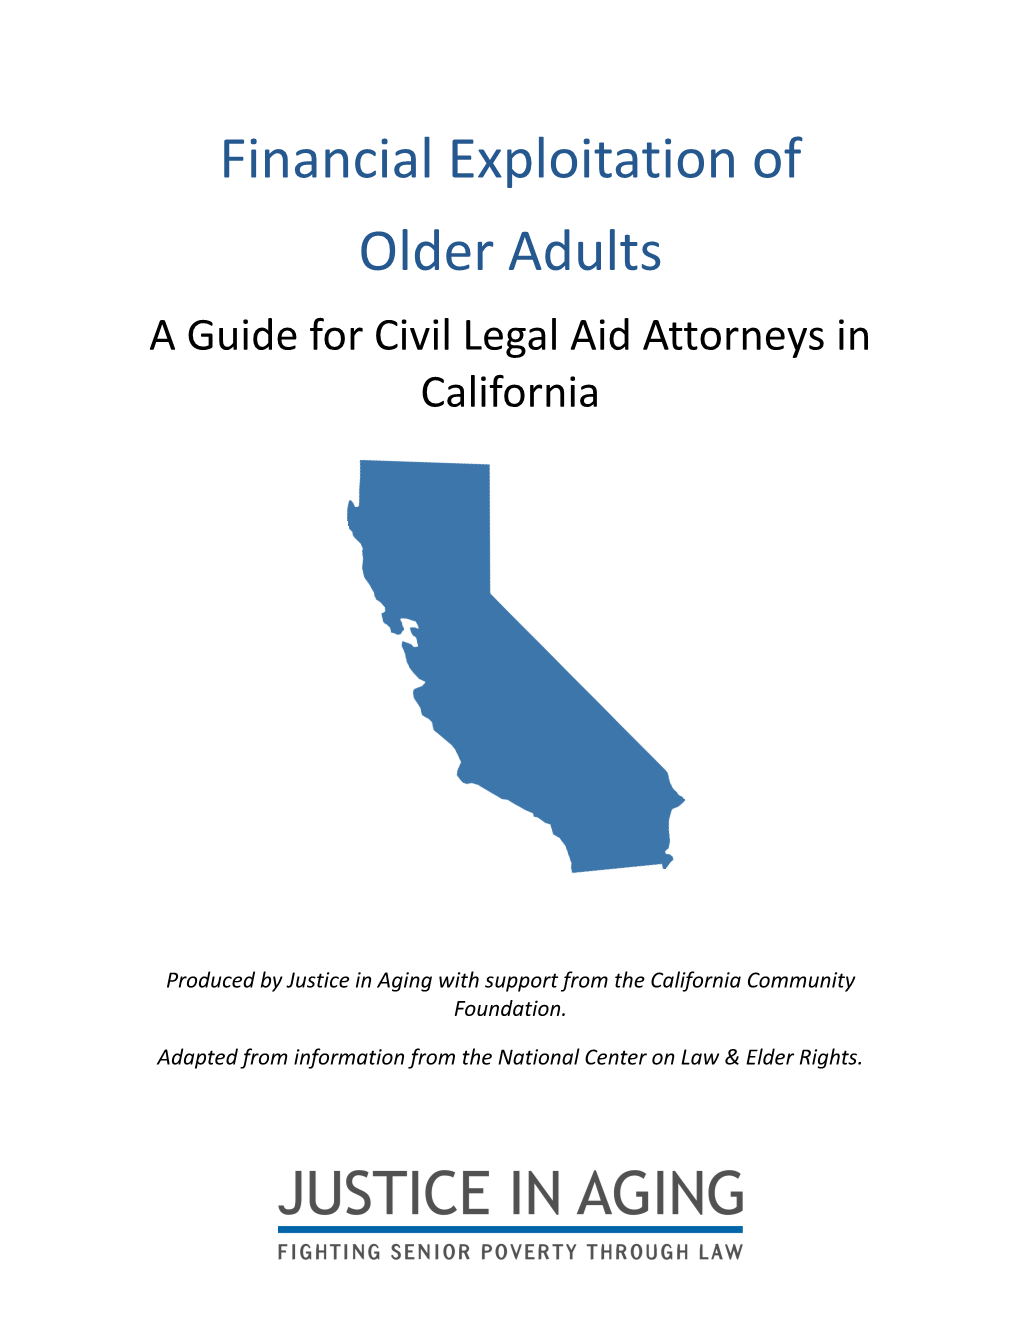 Financial Exploitation of Older Adults a Guide for Civil Legal Aid Attorneys in California